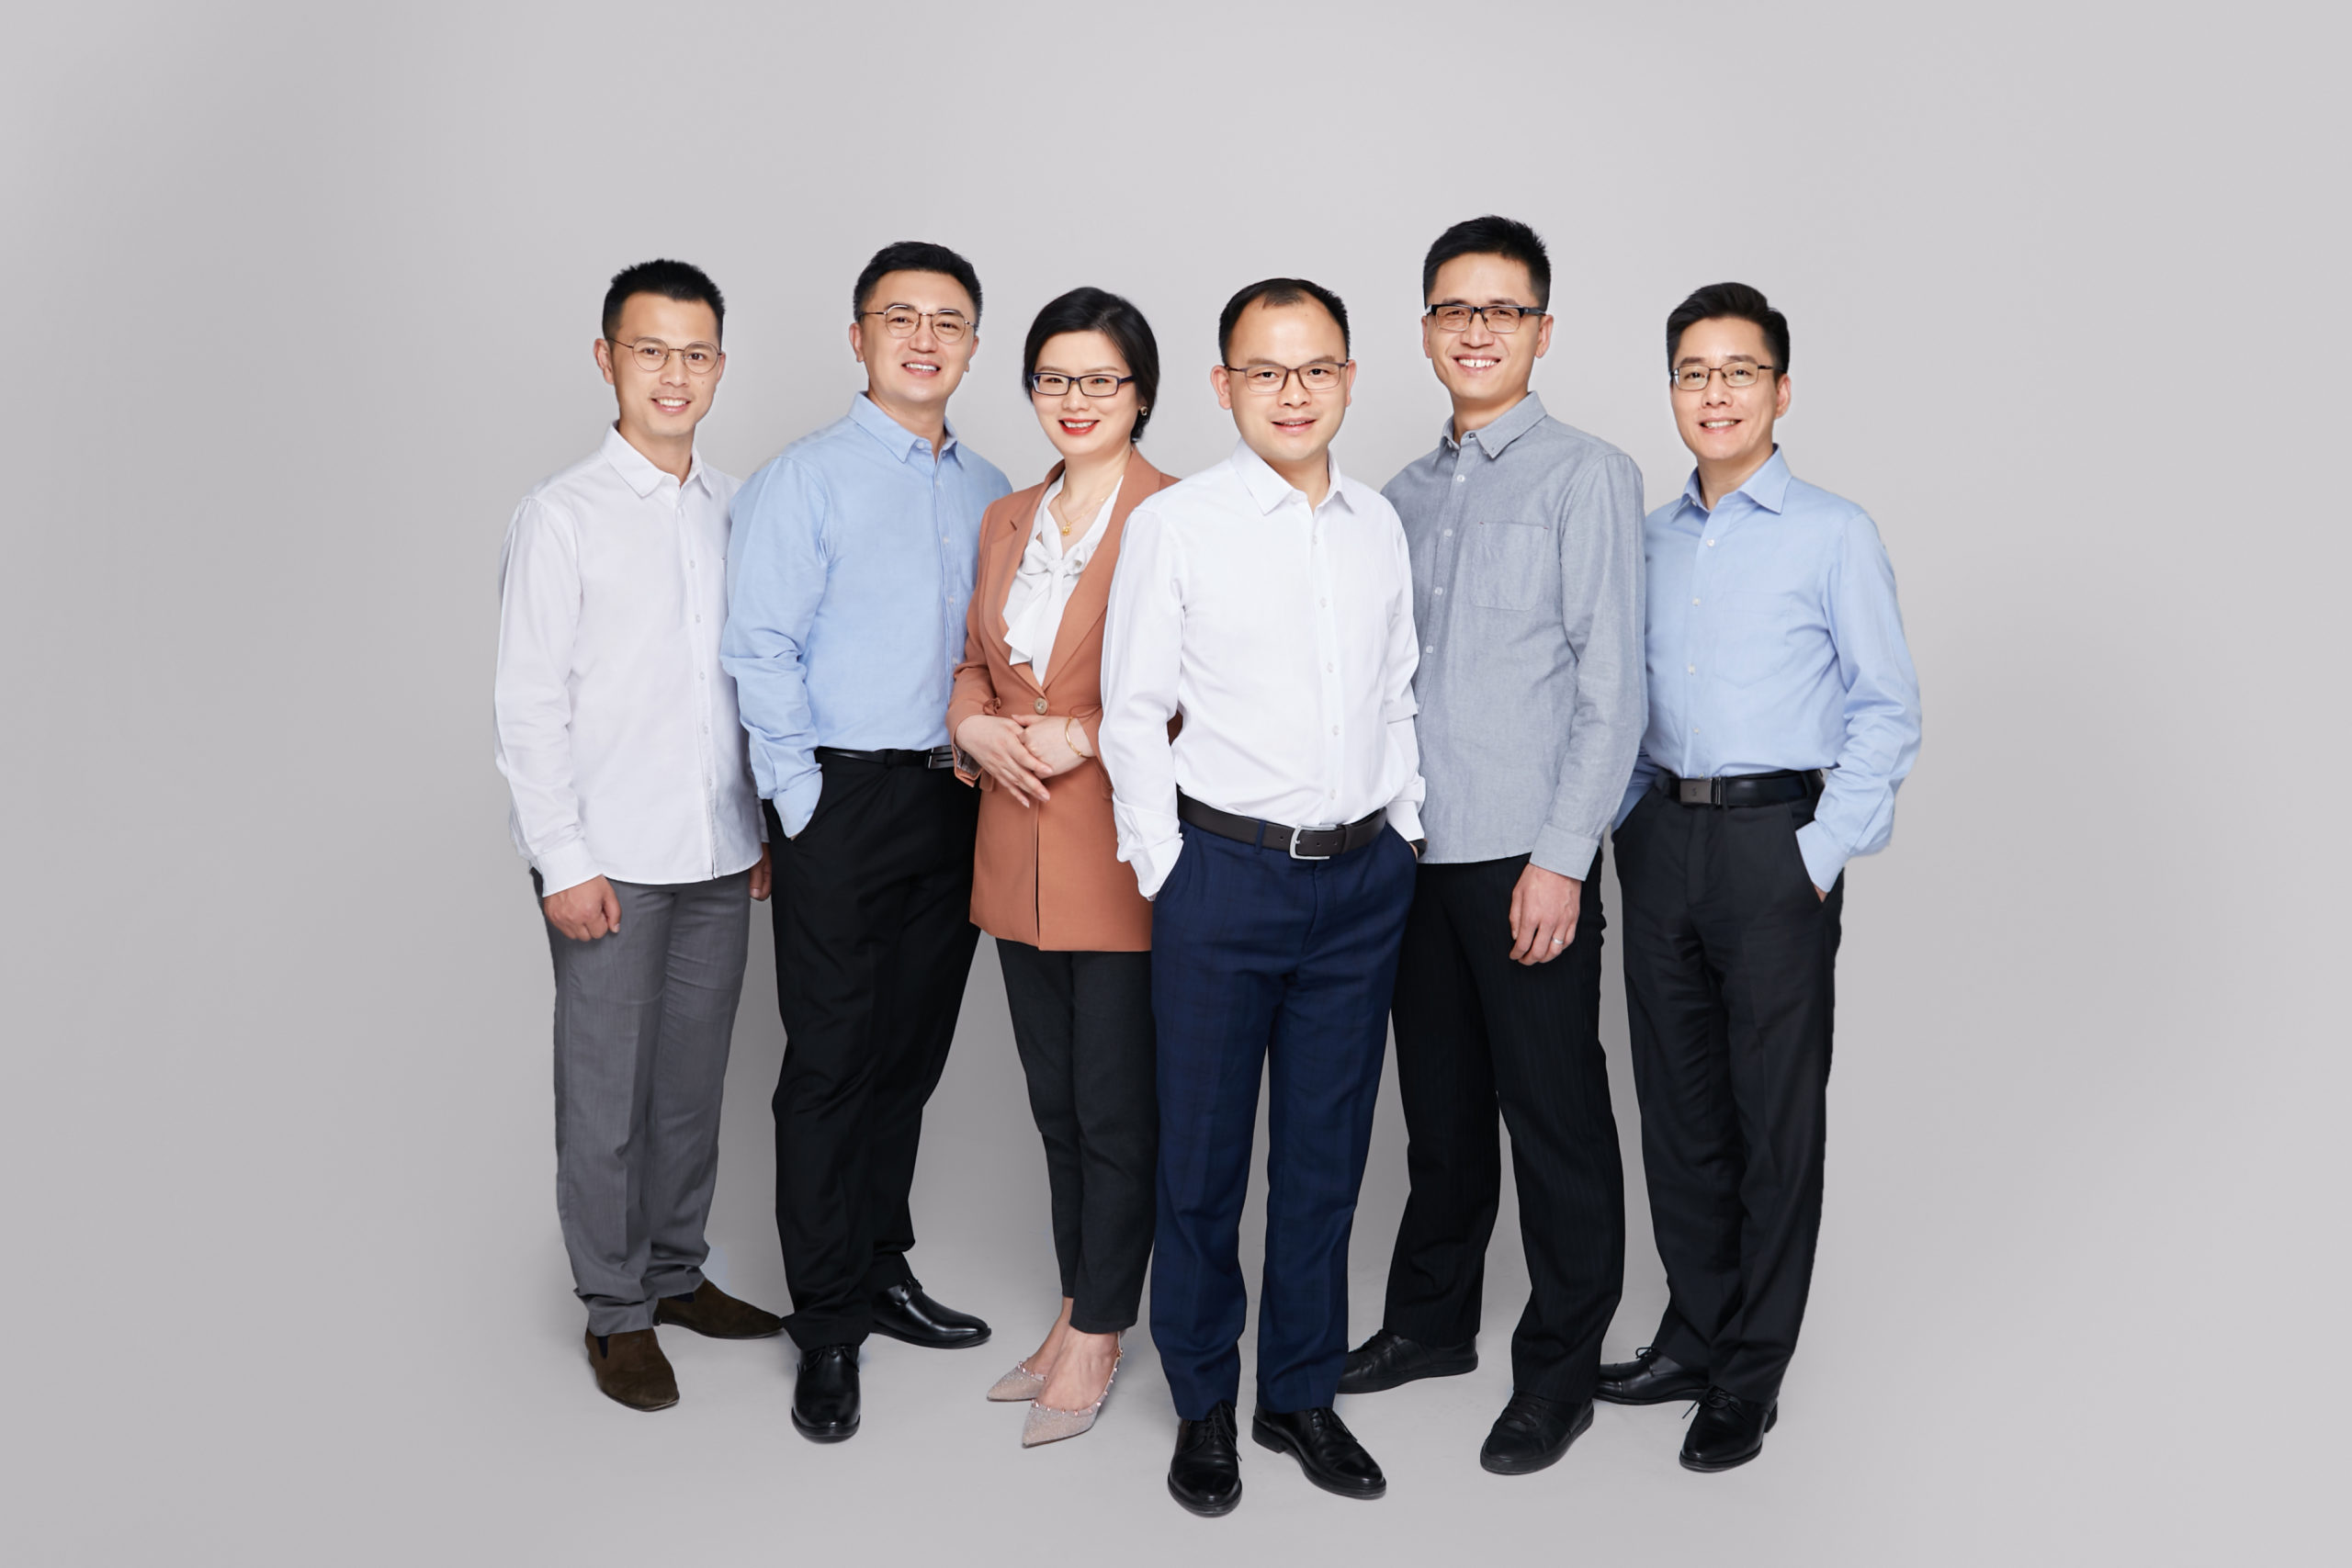 XTransfer simplifies cross-border payments for exporters | Inside China’s Startups